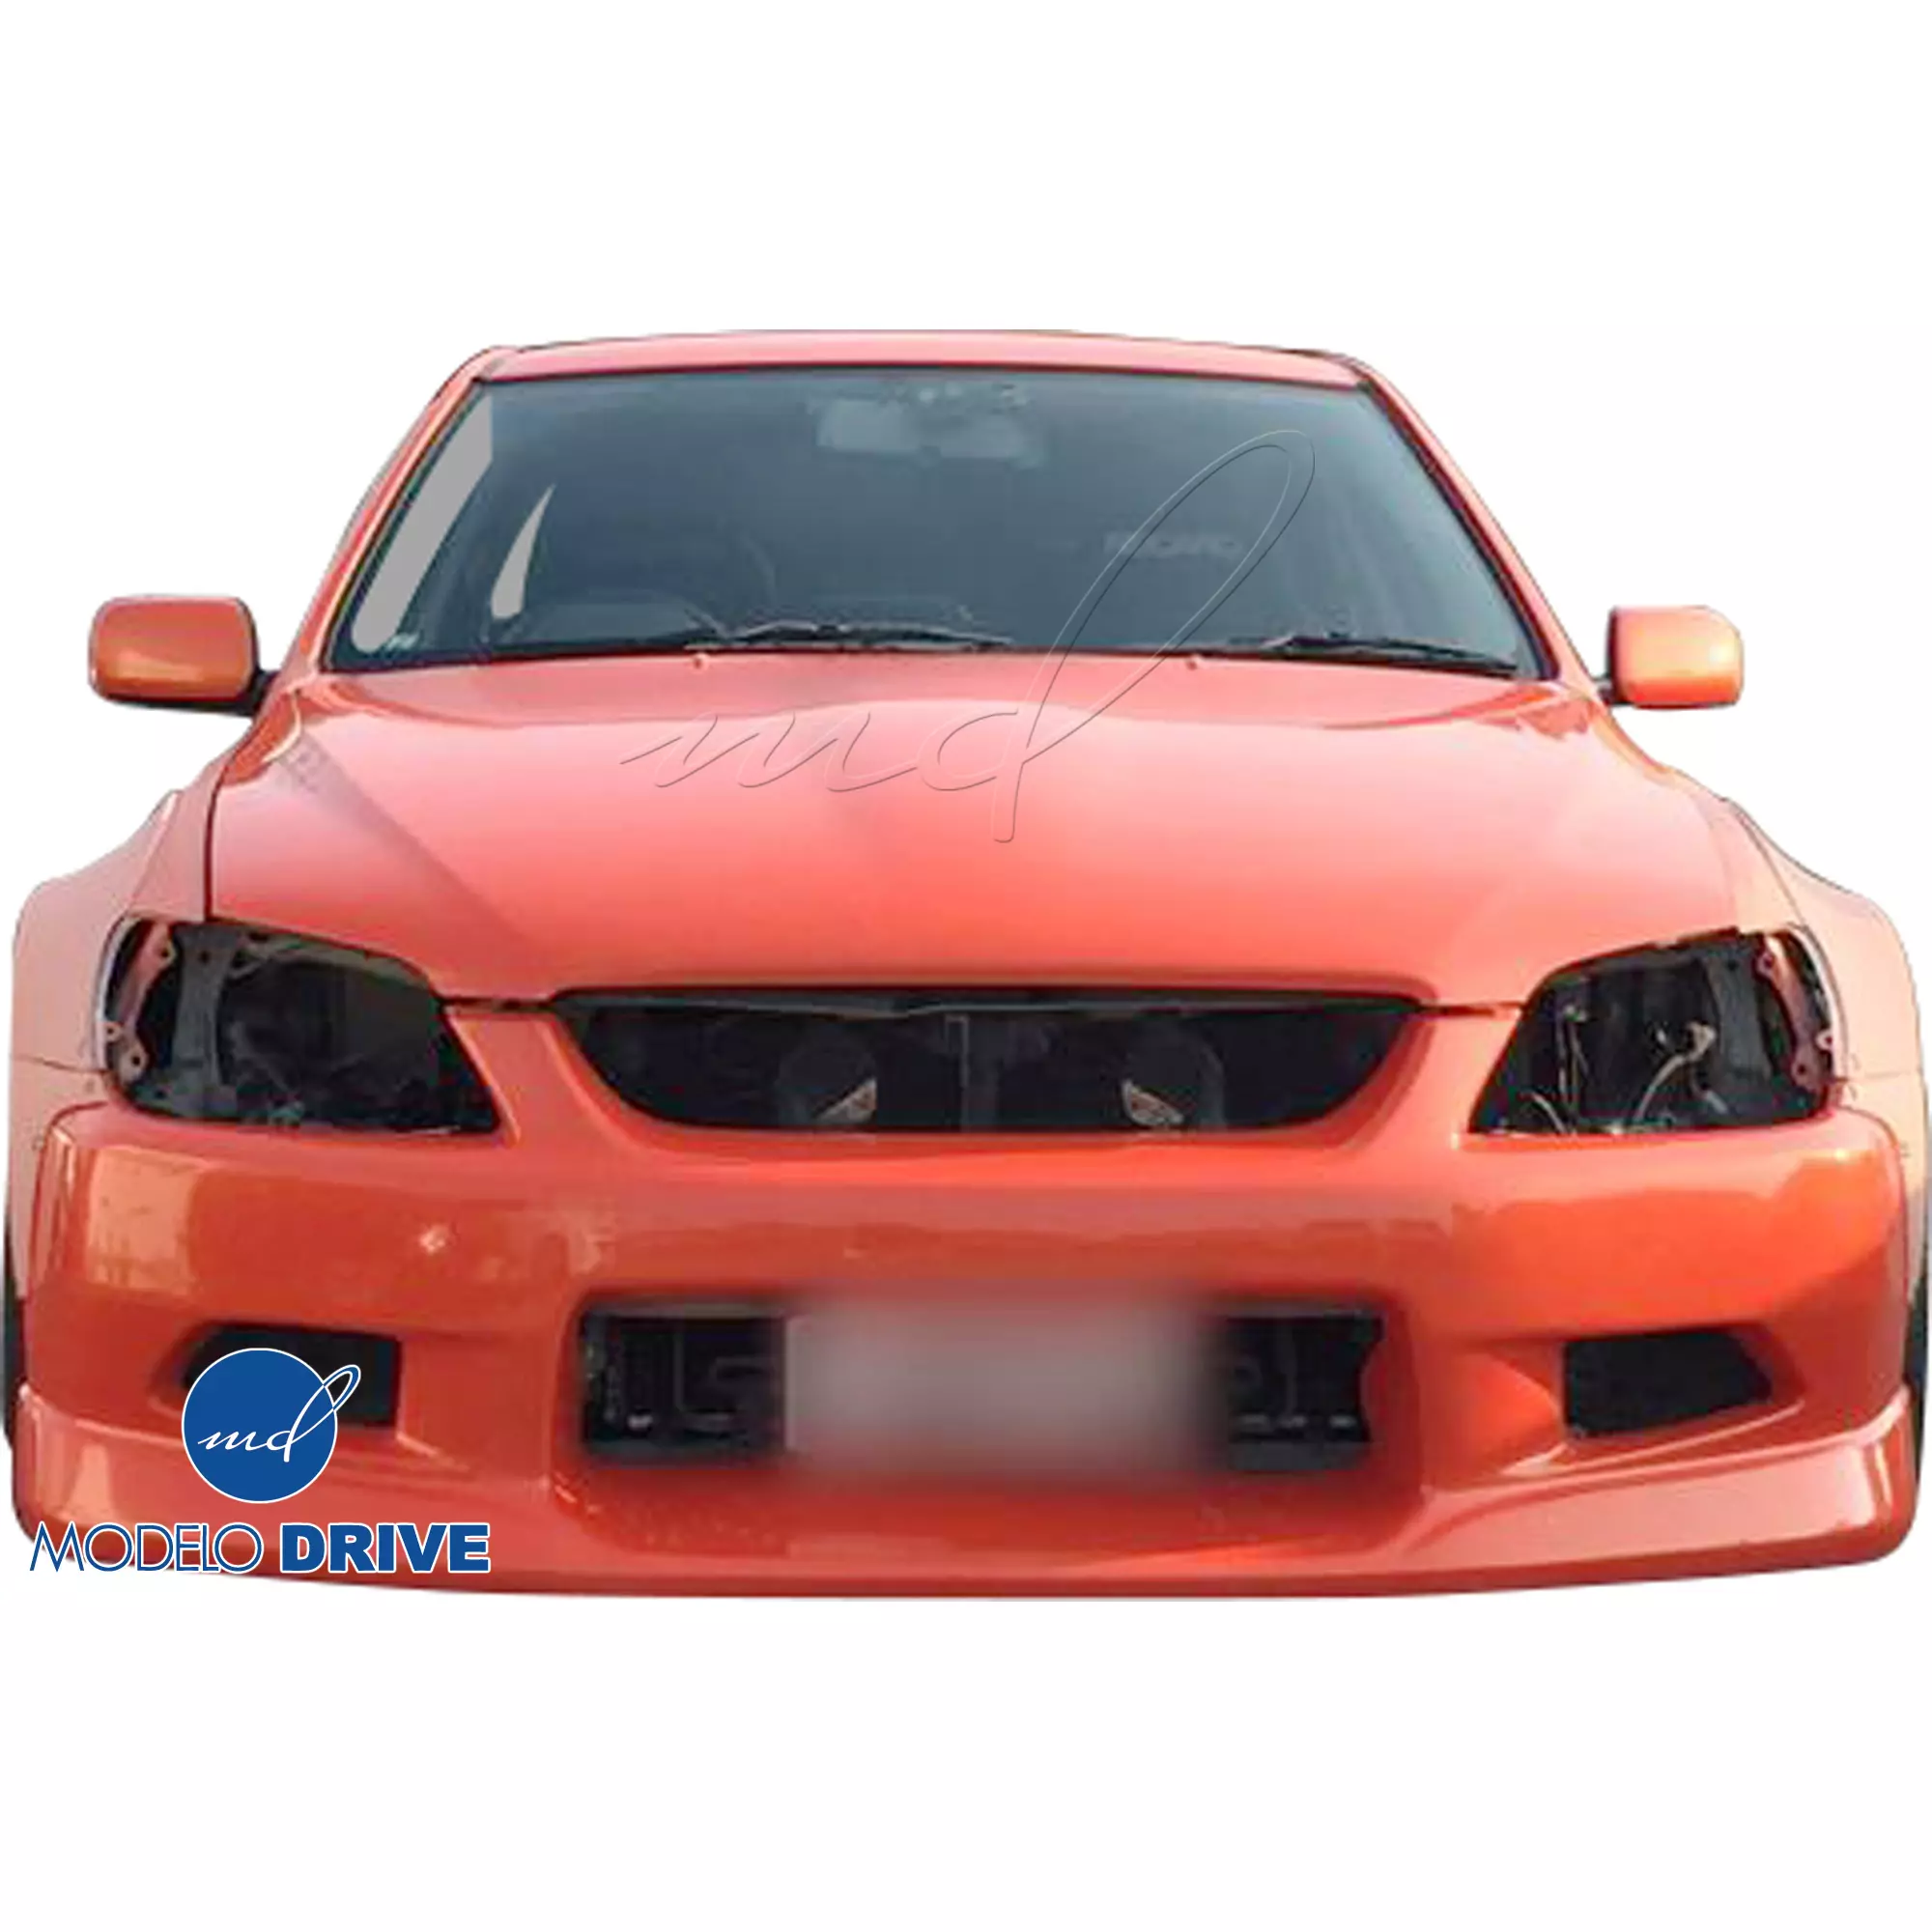 ModeloDrive FRP MSV Wide Body 30/65 Fender Flare Set 8pc > Lexus IS Series IS300 2000-2005> 4dr - Image 31